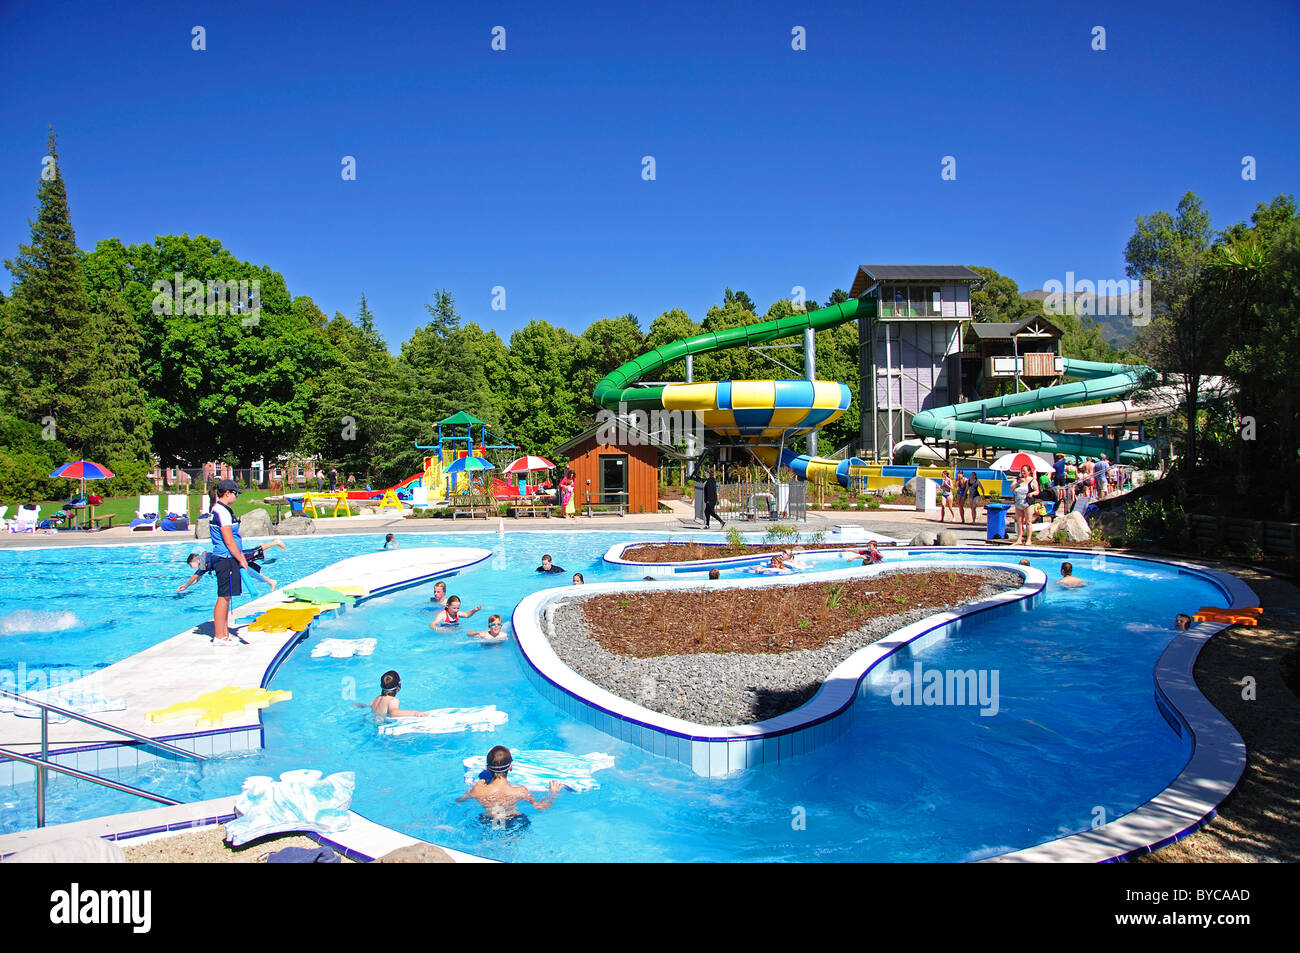 'Lazy River' ride, Hanmer Springs Thermal Pools & Spa, Hanmer Springs, North Canterbury, Canterbury, South Island, New Zealand Stock Photo